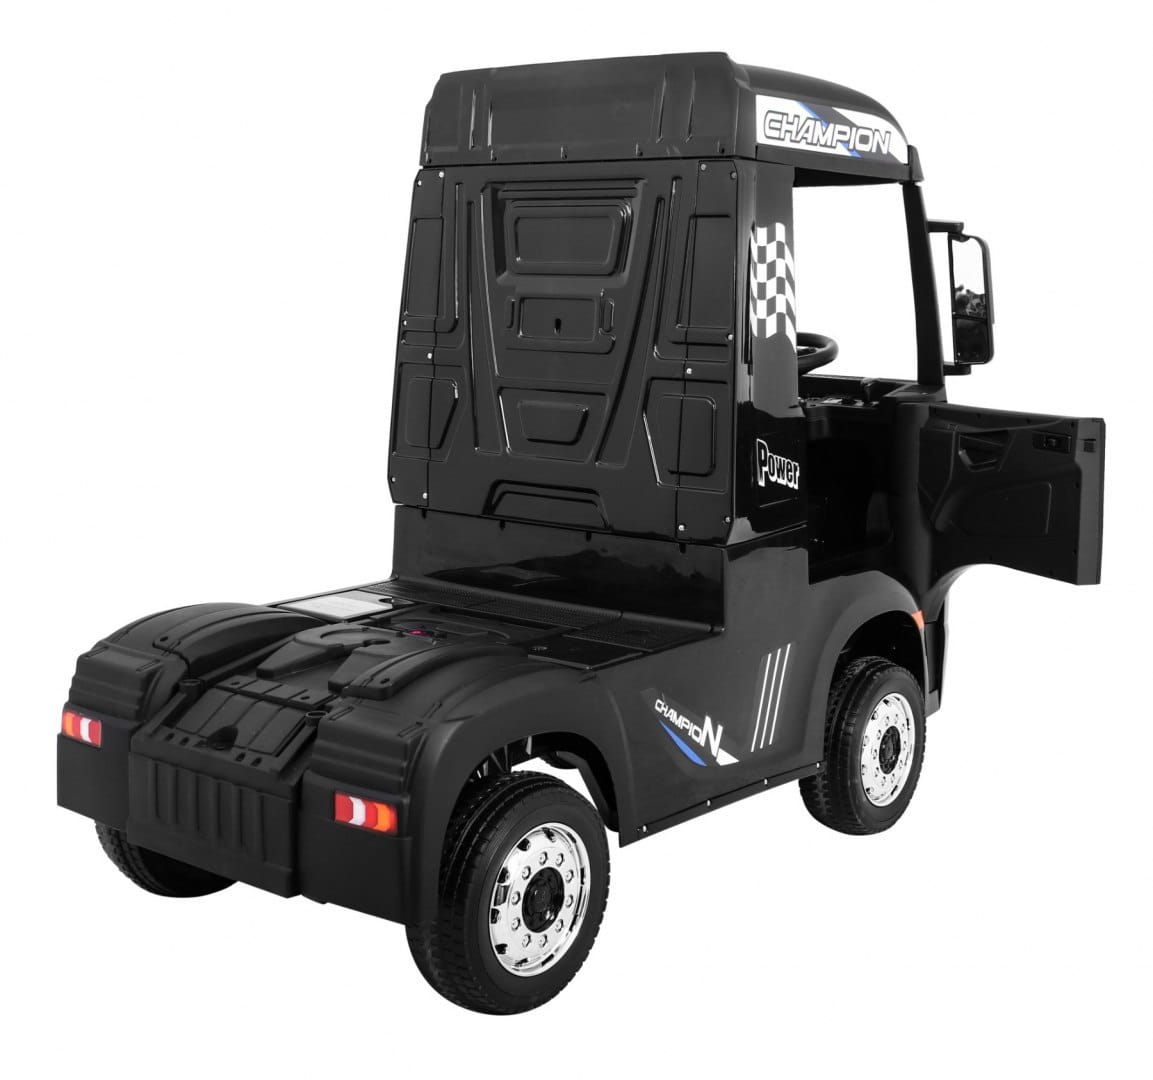 Black Mercedes Actros 24 Volt Electric Ride on Lorry for Kids with Parental Control and Champion Decals